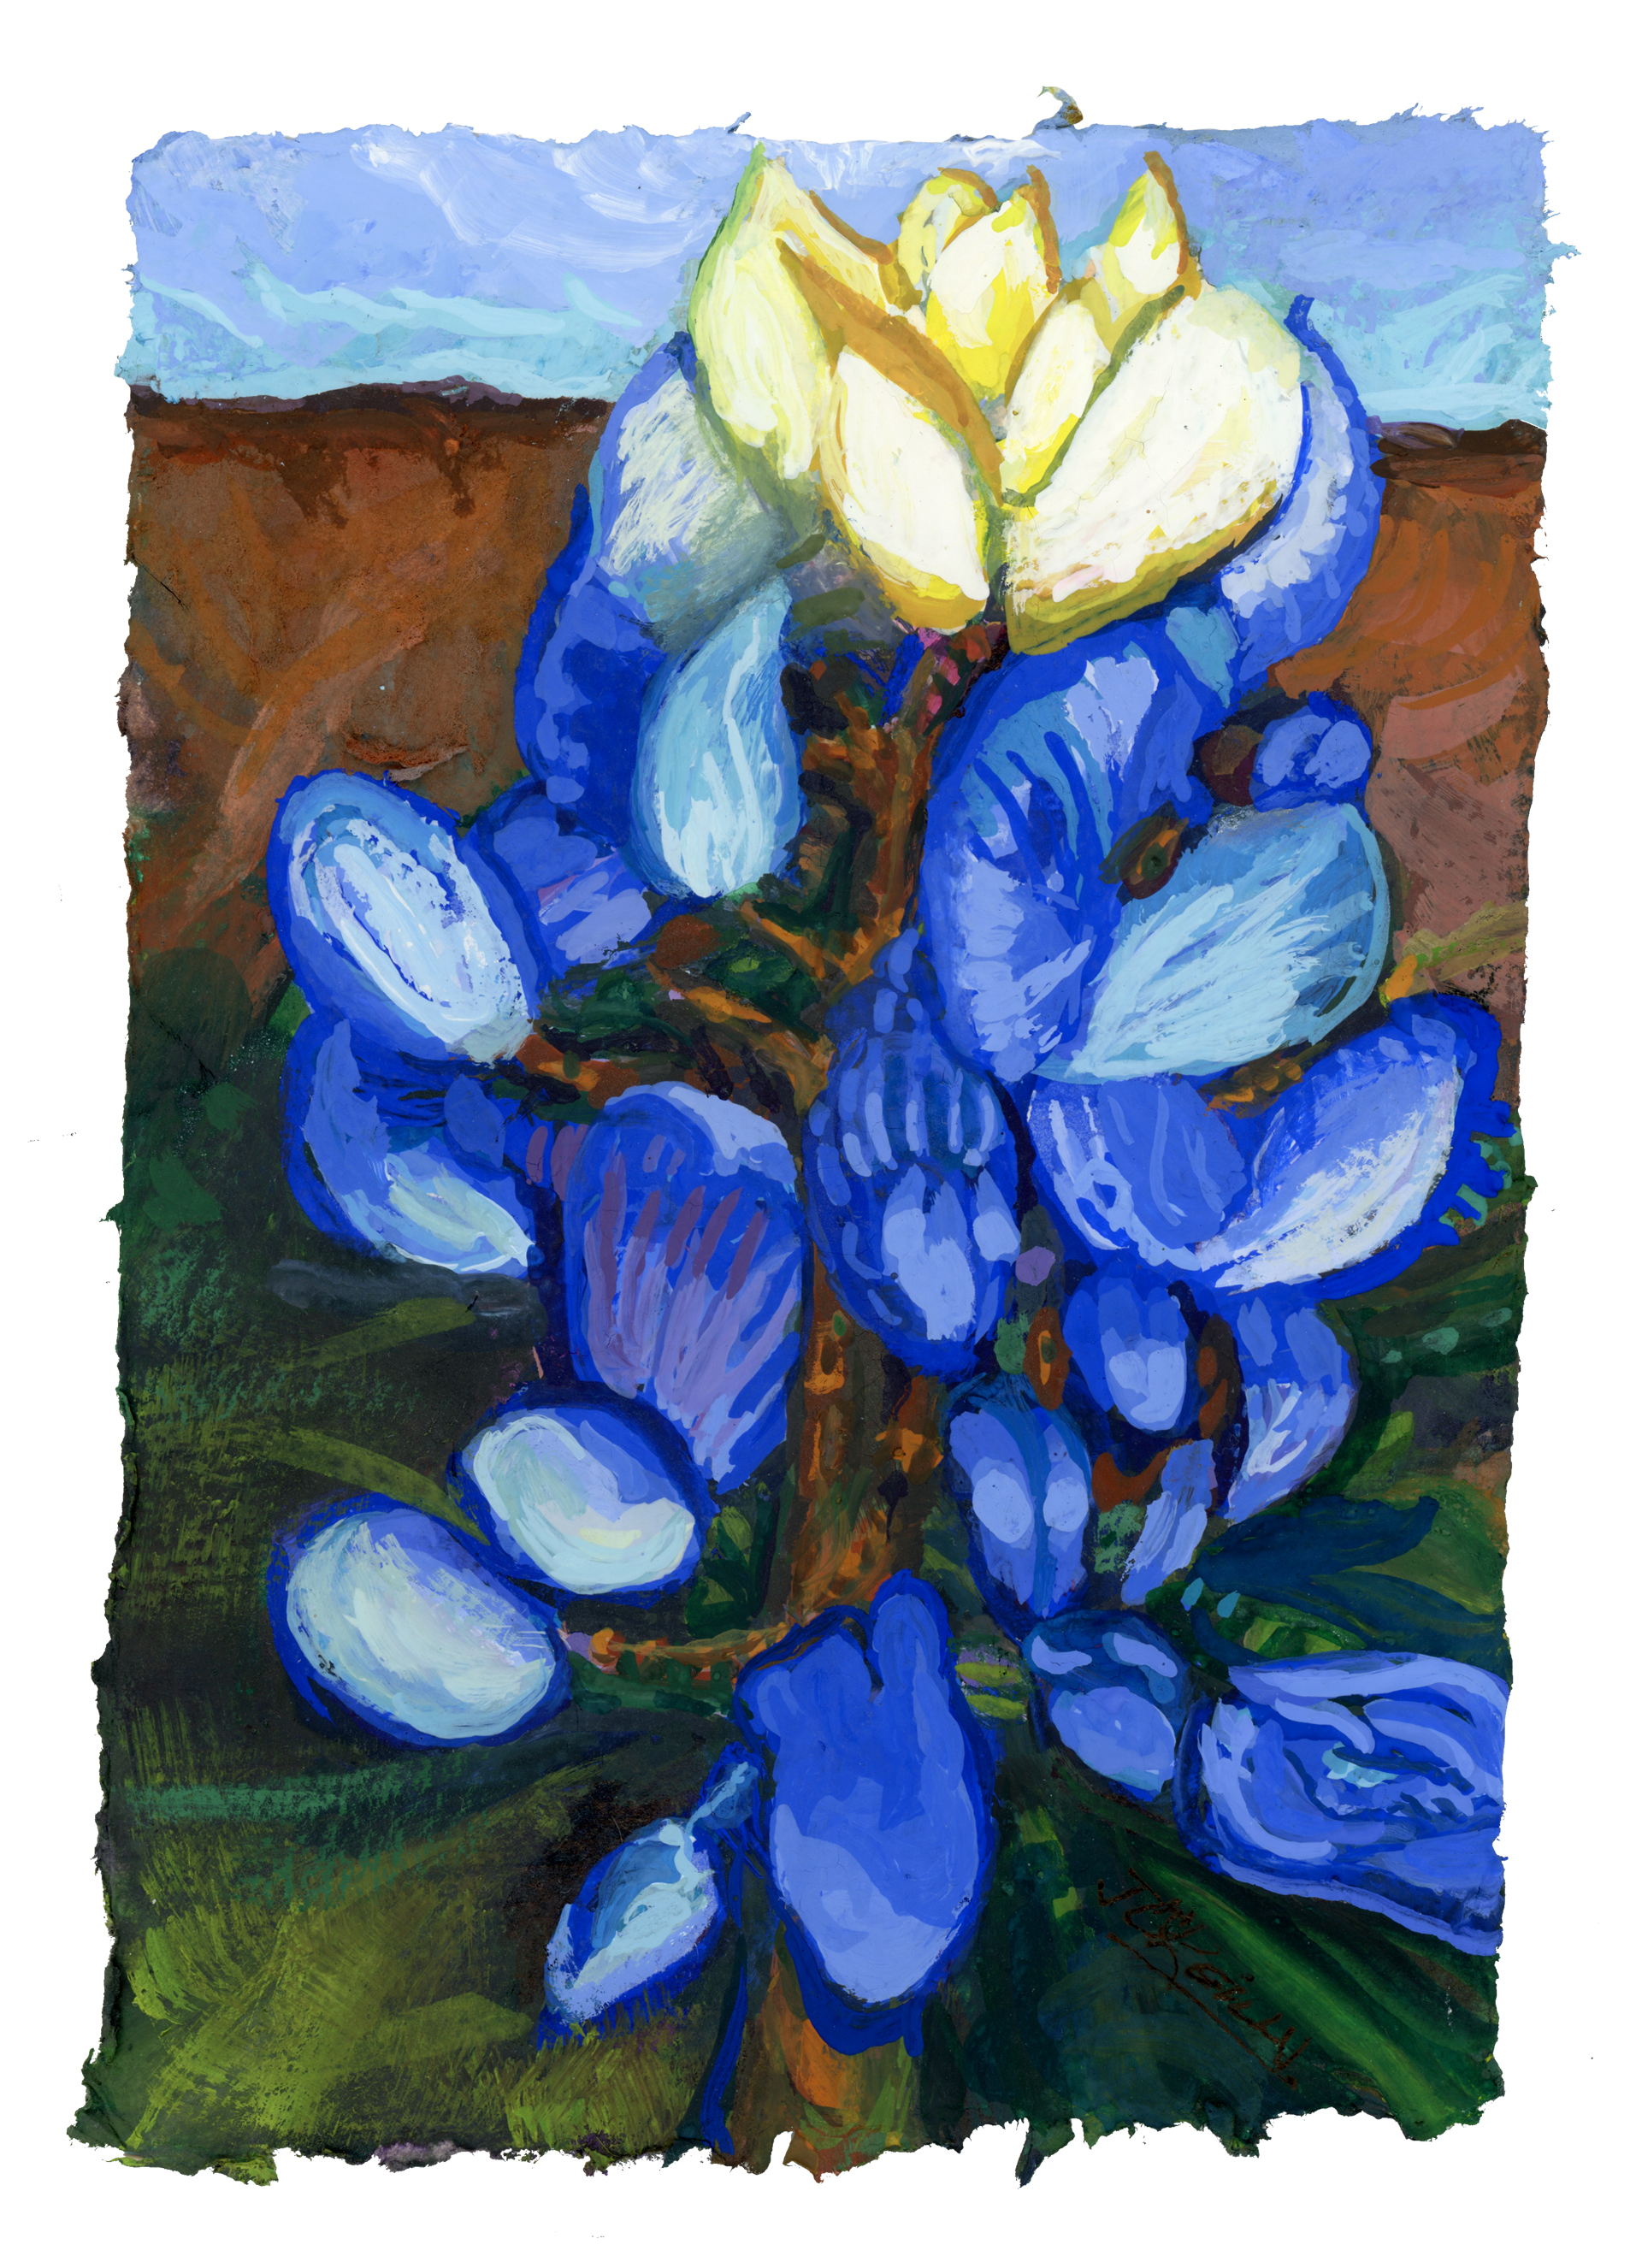 Ode to a Texas Bluebonnet, gouache painting on handmade paper, by Julia O'Reilly